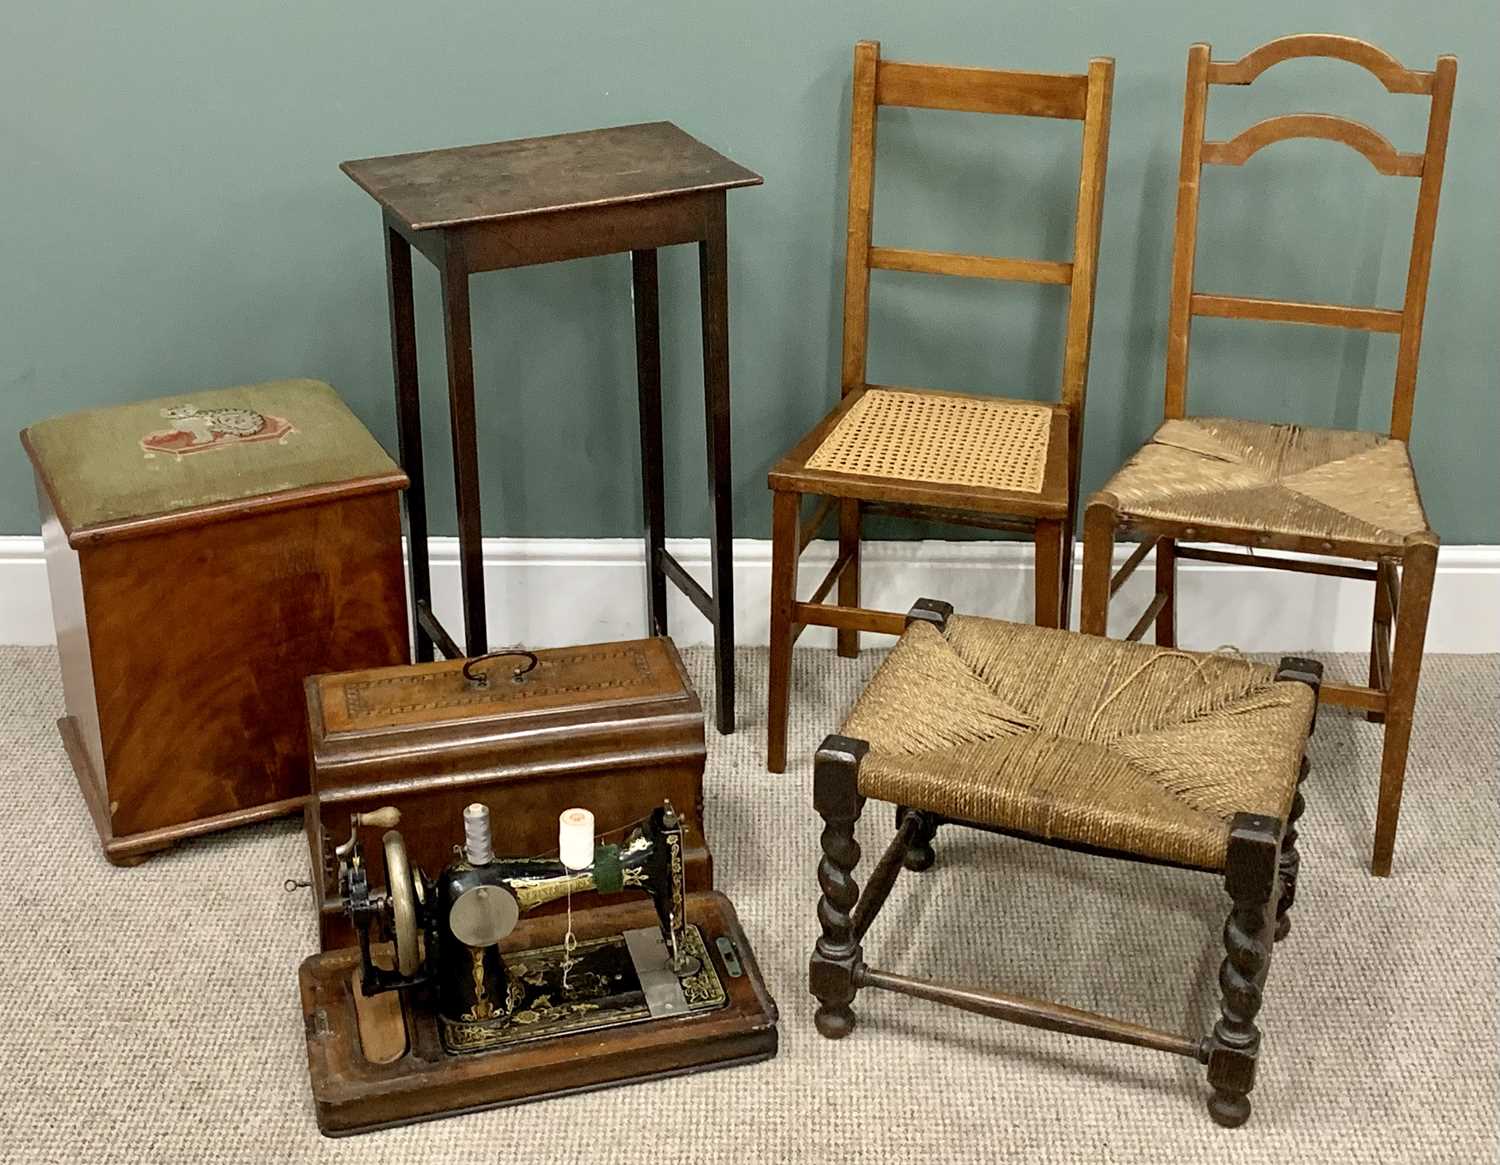 VINTAGE OCCASIONAL FURNITURE ASSORTMENT (6) - Frister & Ross hand crank cased sewing machine, two